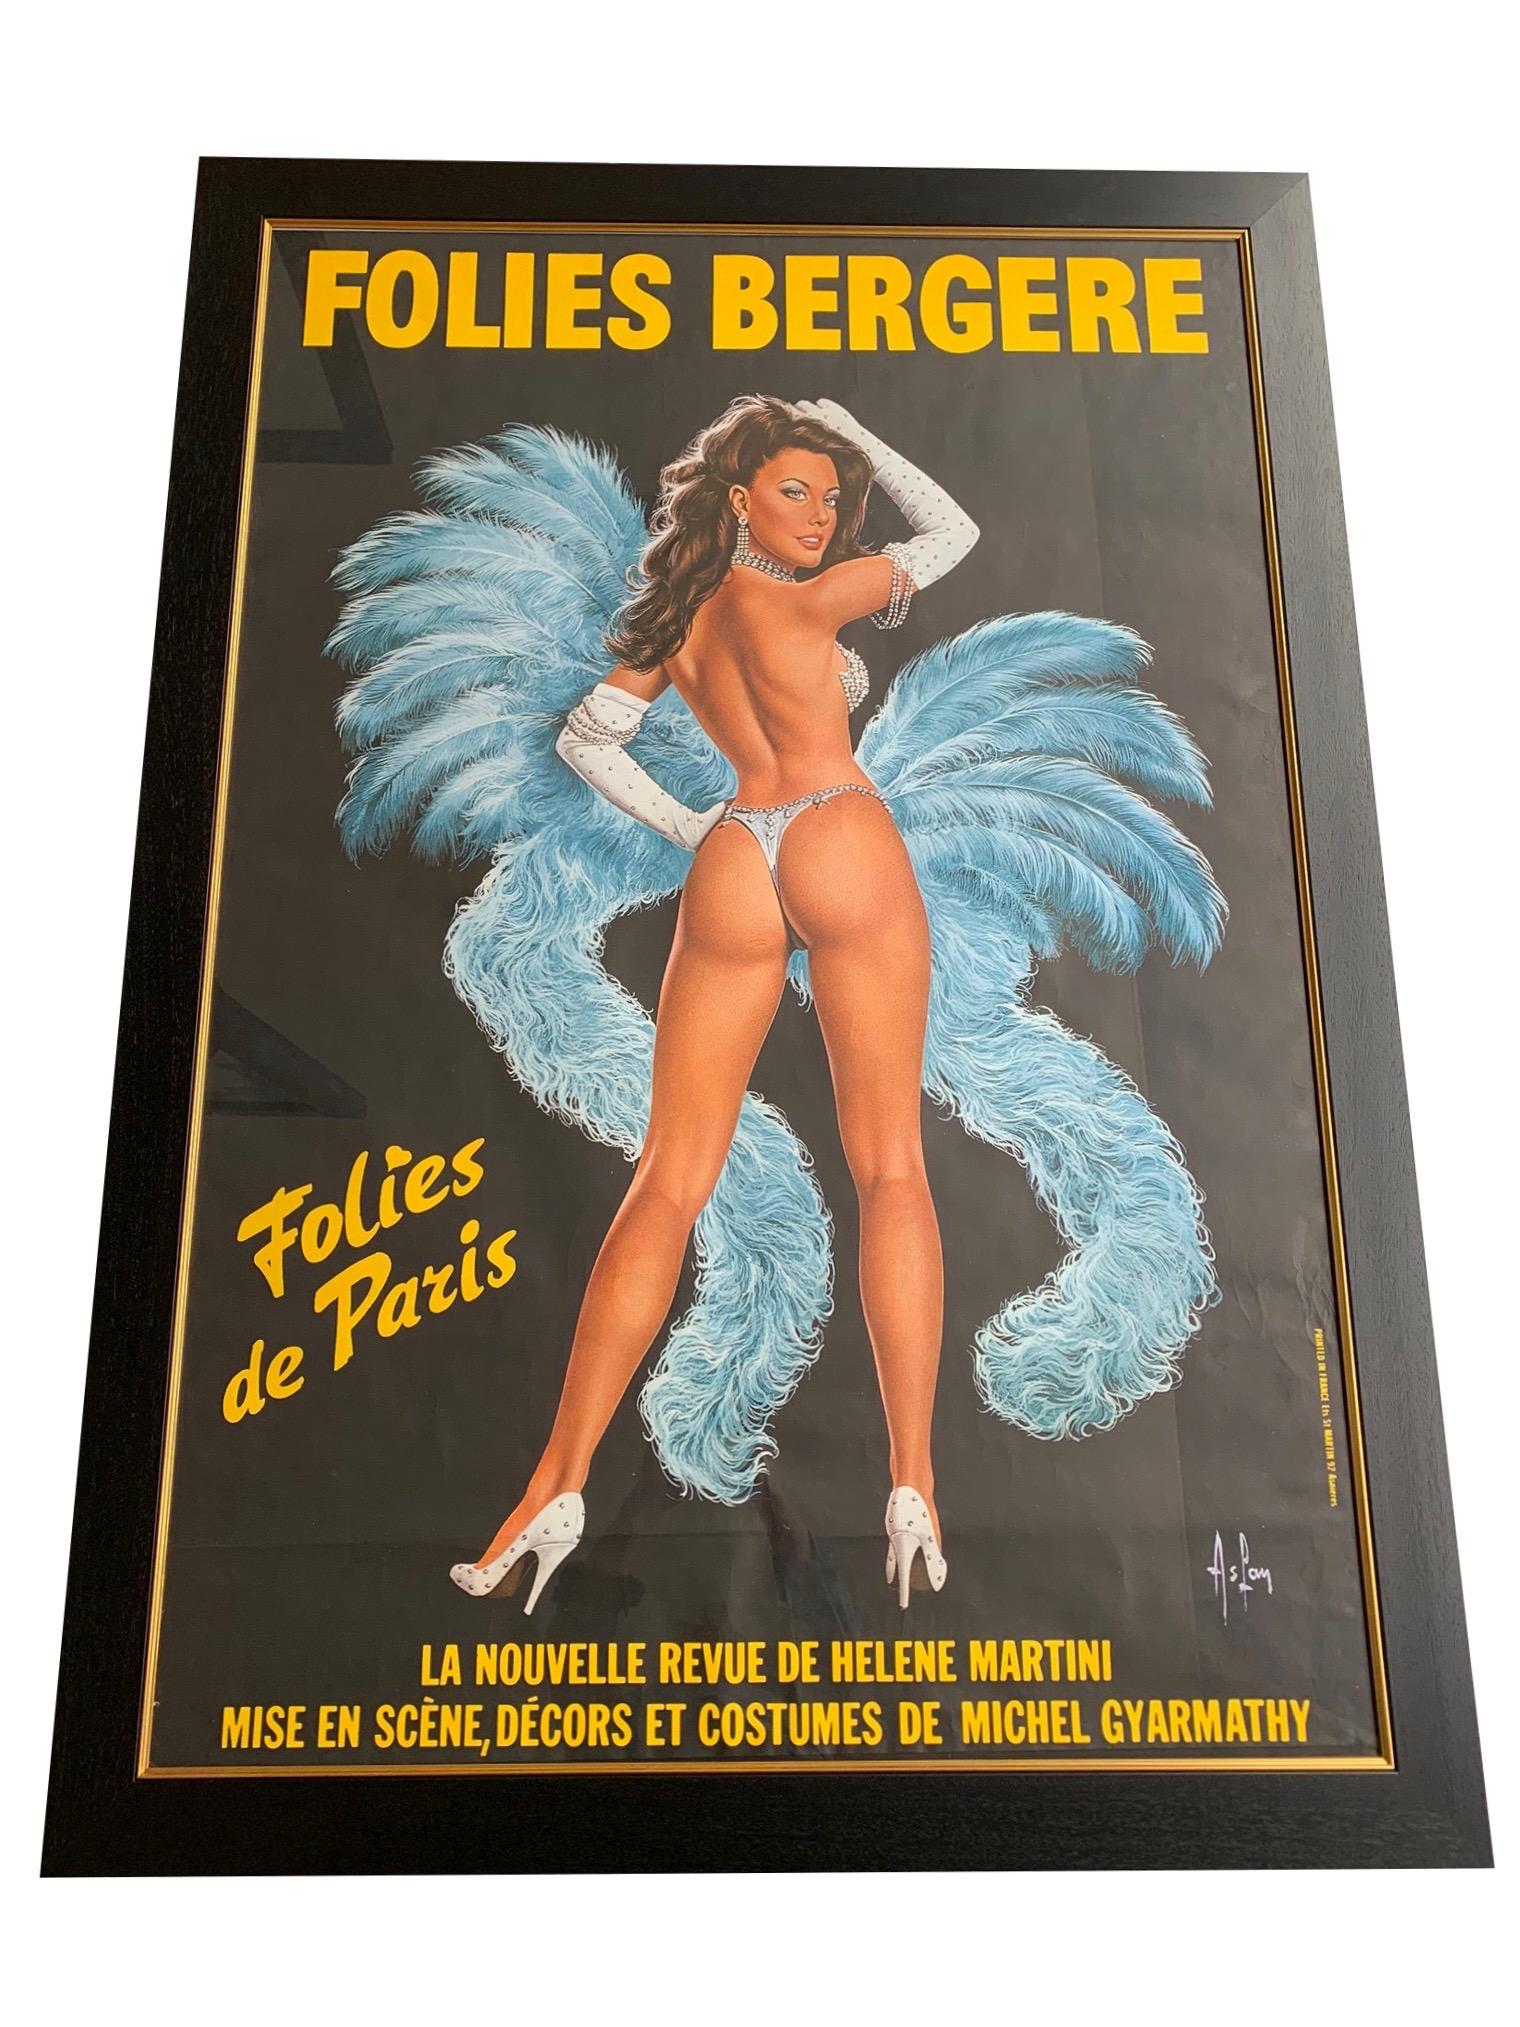 A fabulous original 1960s large Folies Bergere poster by artist Alain Gourdon Aka AsLan. It depicts a semi clad, sequinned showgirl with baby blue boa and feathers. Signed in the print 